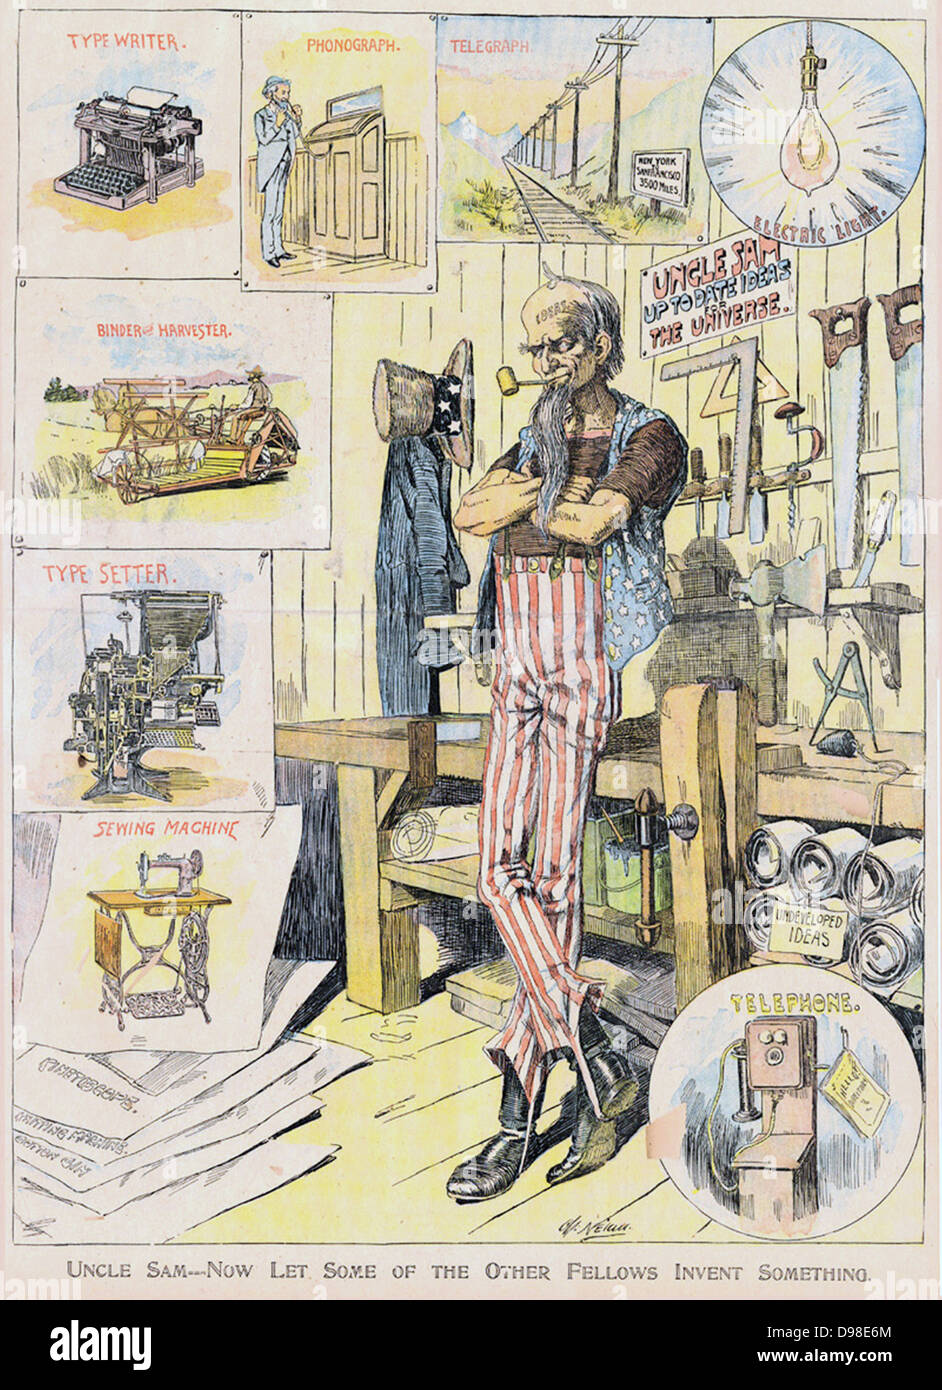 Uncle Sam - Now Let Some of the Other Fellows Invent Something': cartoon by Charles Nelan (1858-1904) from 'New York Herald' 9 January 1898. .Uncle Sam in workshop, surrounded by Typewriter, Phonograph, Reaper, Telegraph, Telephone, etc. Stock Photo